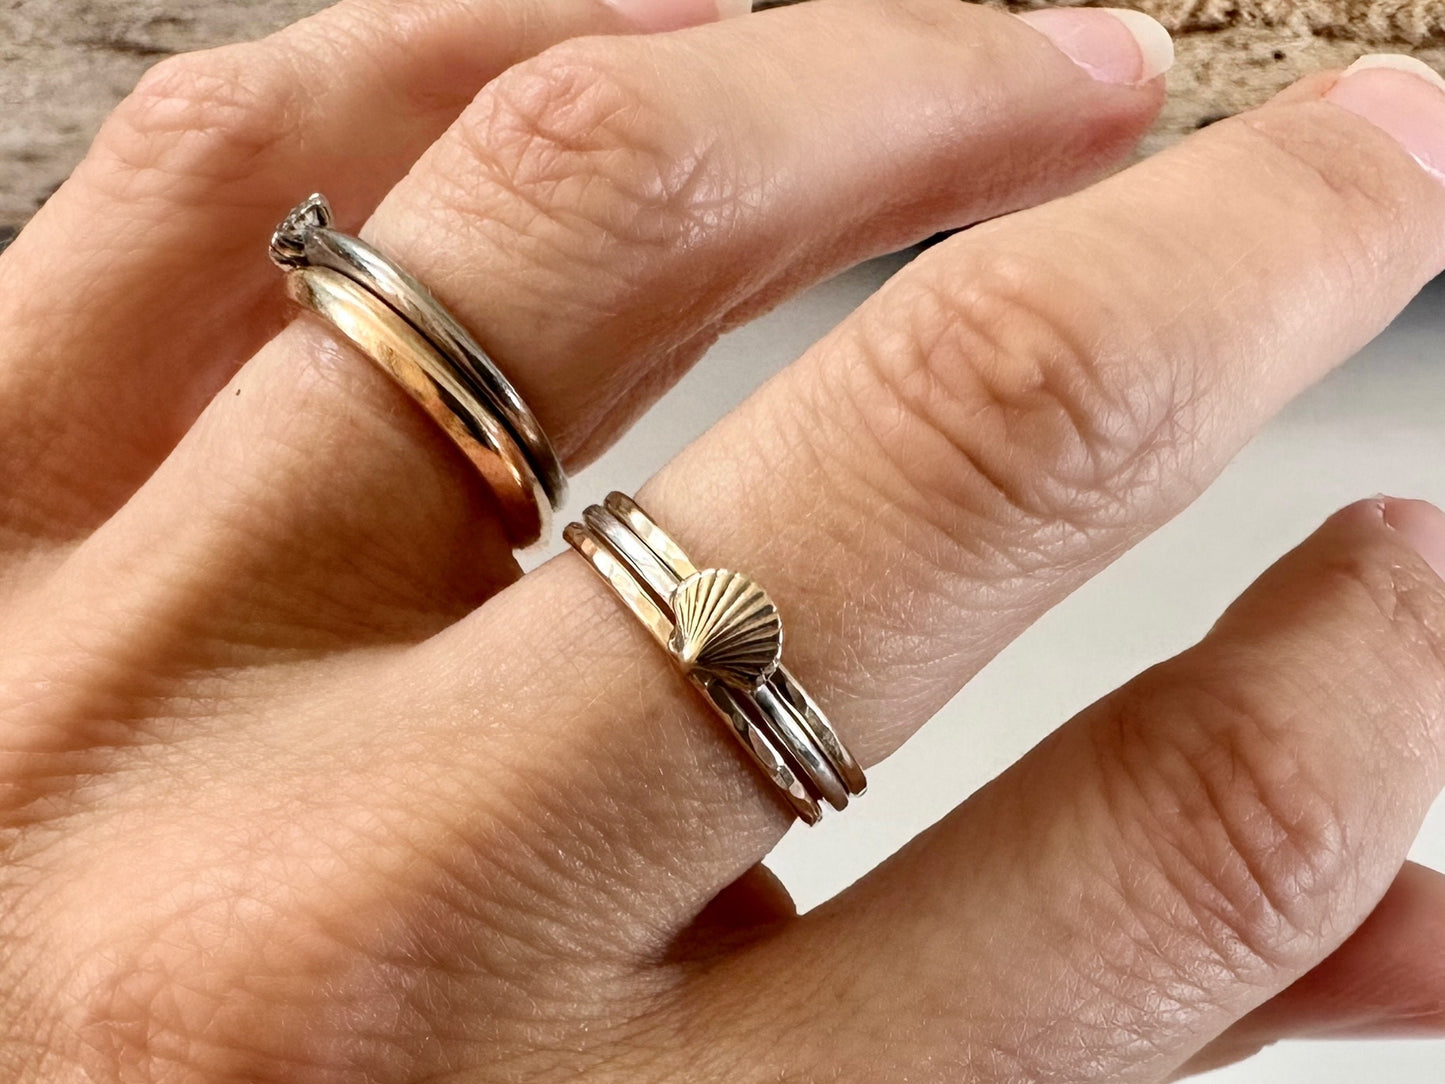 Scallop Shell Stacking Ring, Solid 9ct Gold or Sterling Silver Shell on a 1.2mm 925 Sterling Silver Ring Band, Seashell Ring